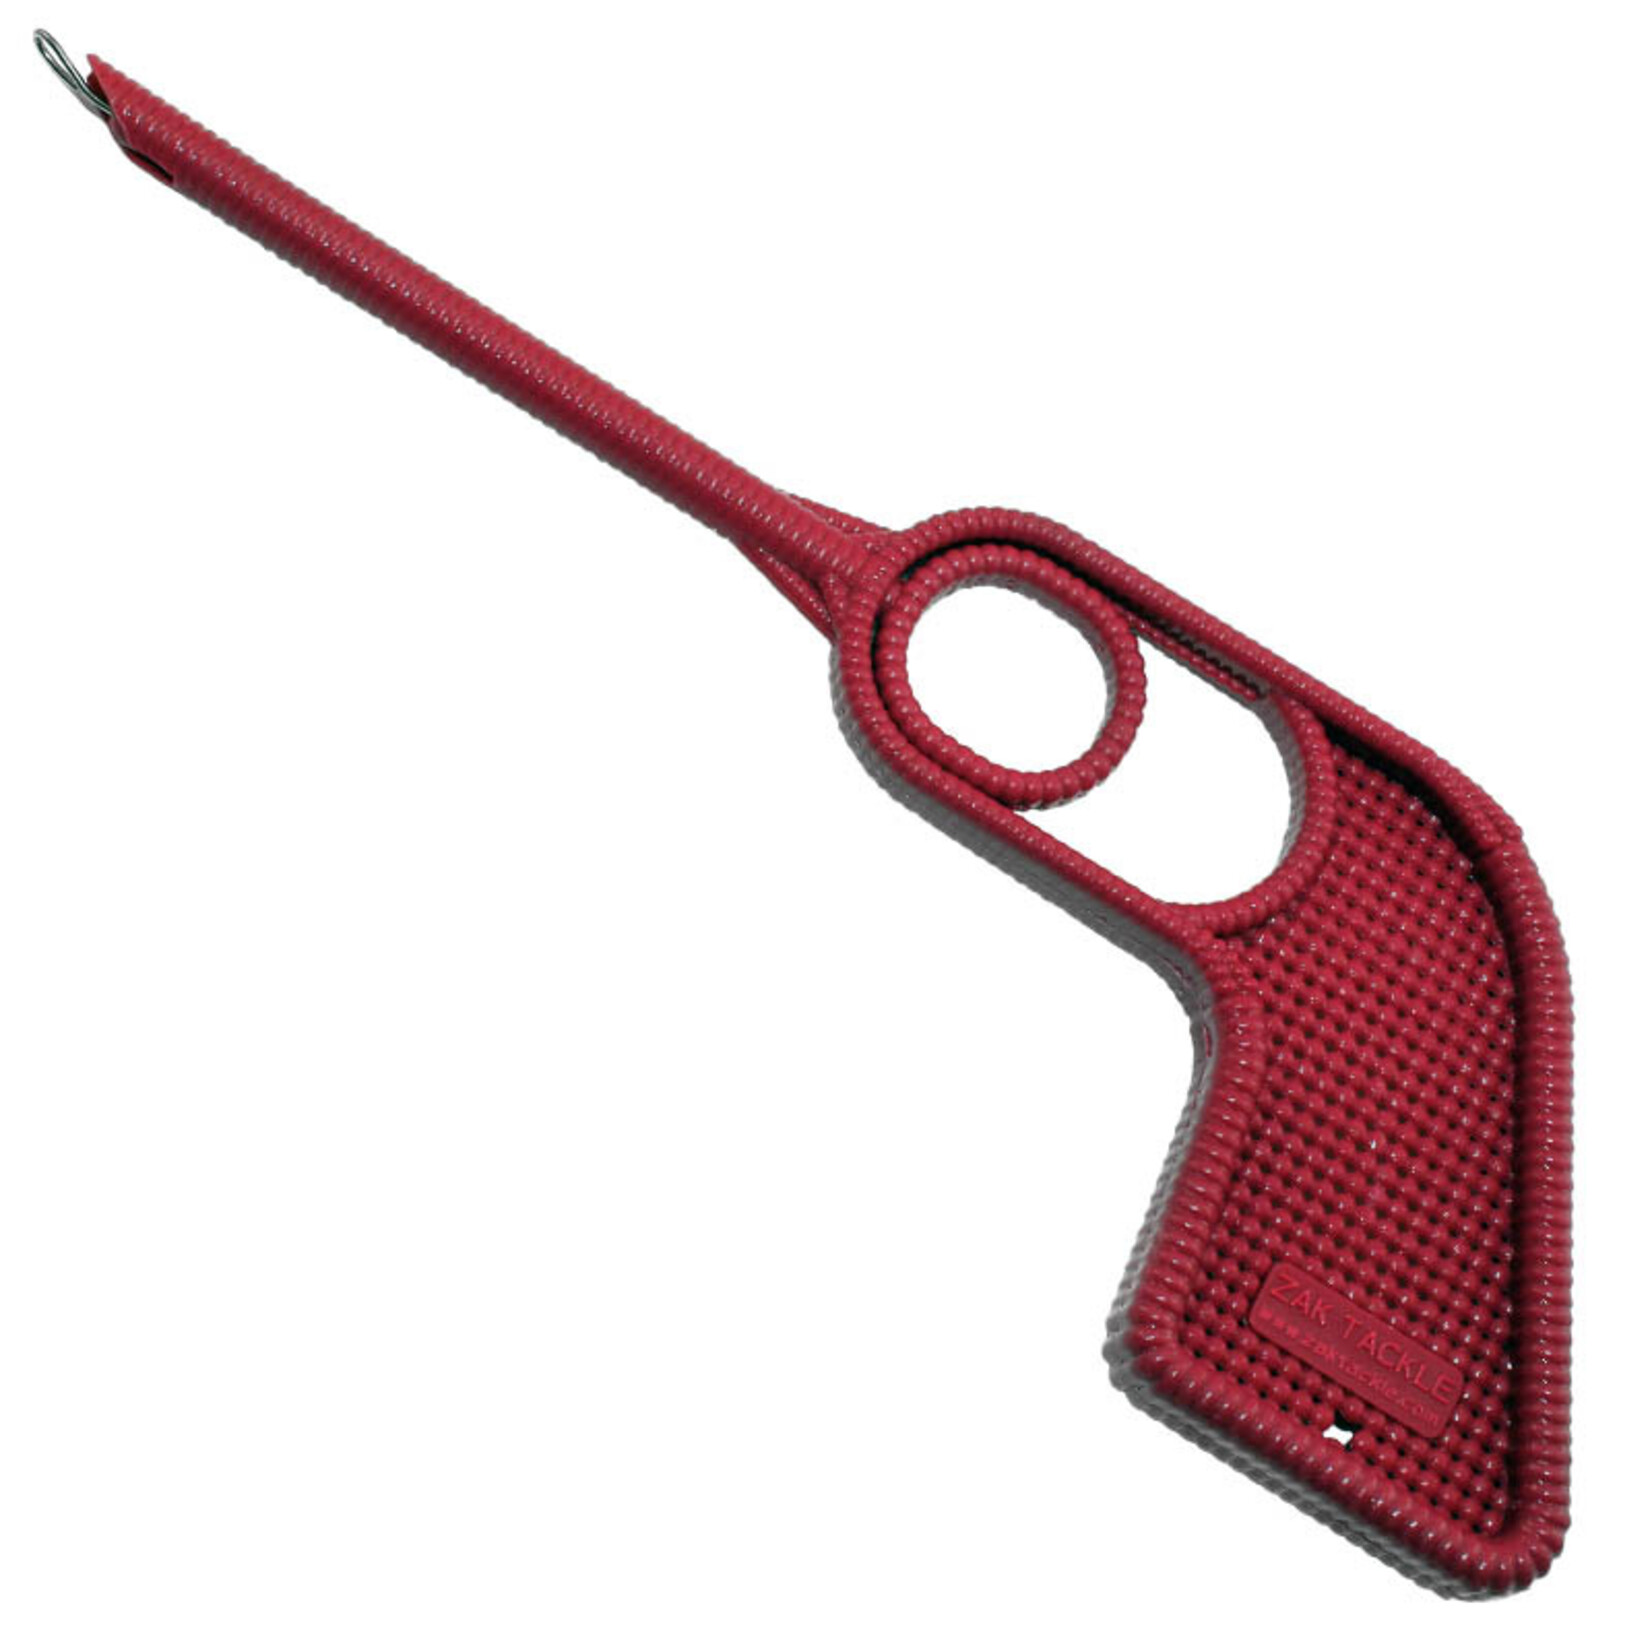 Pro Trigger Release Fish Hook Remover - Home